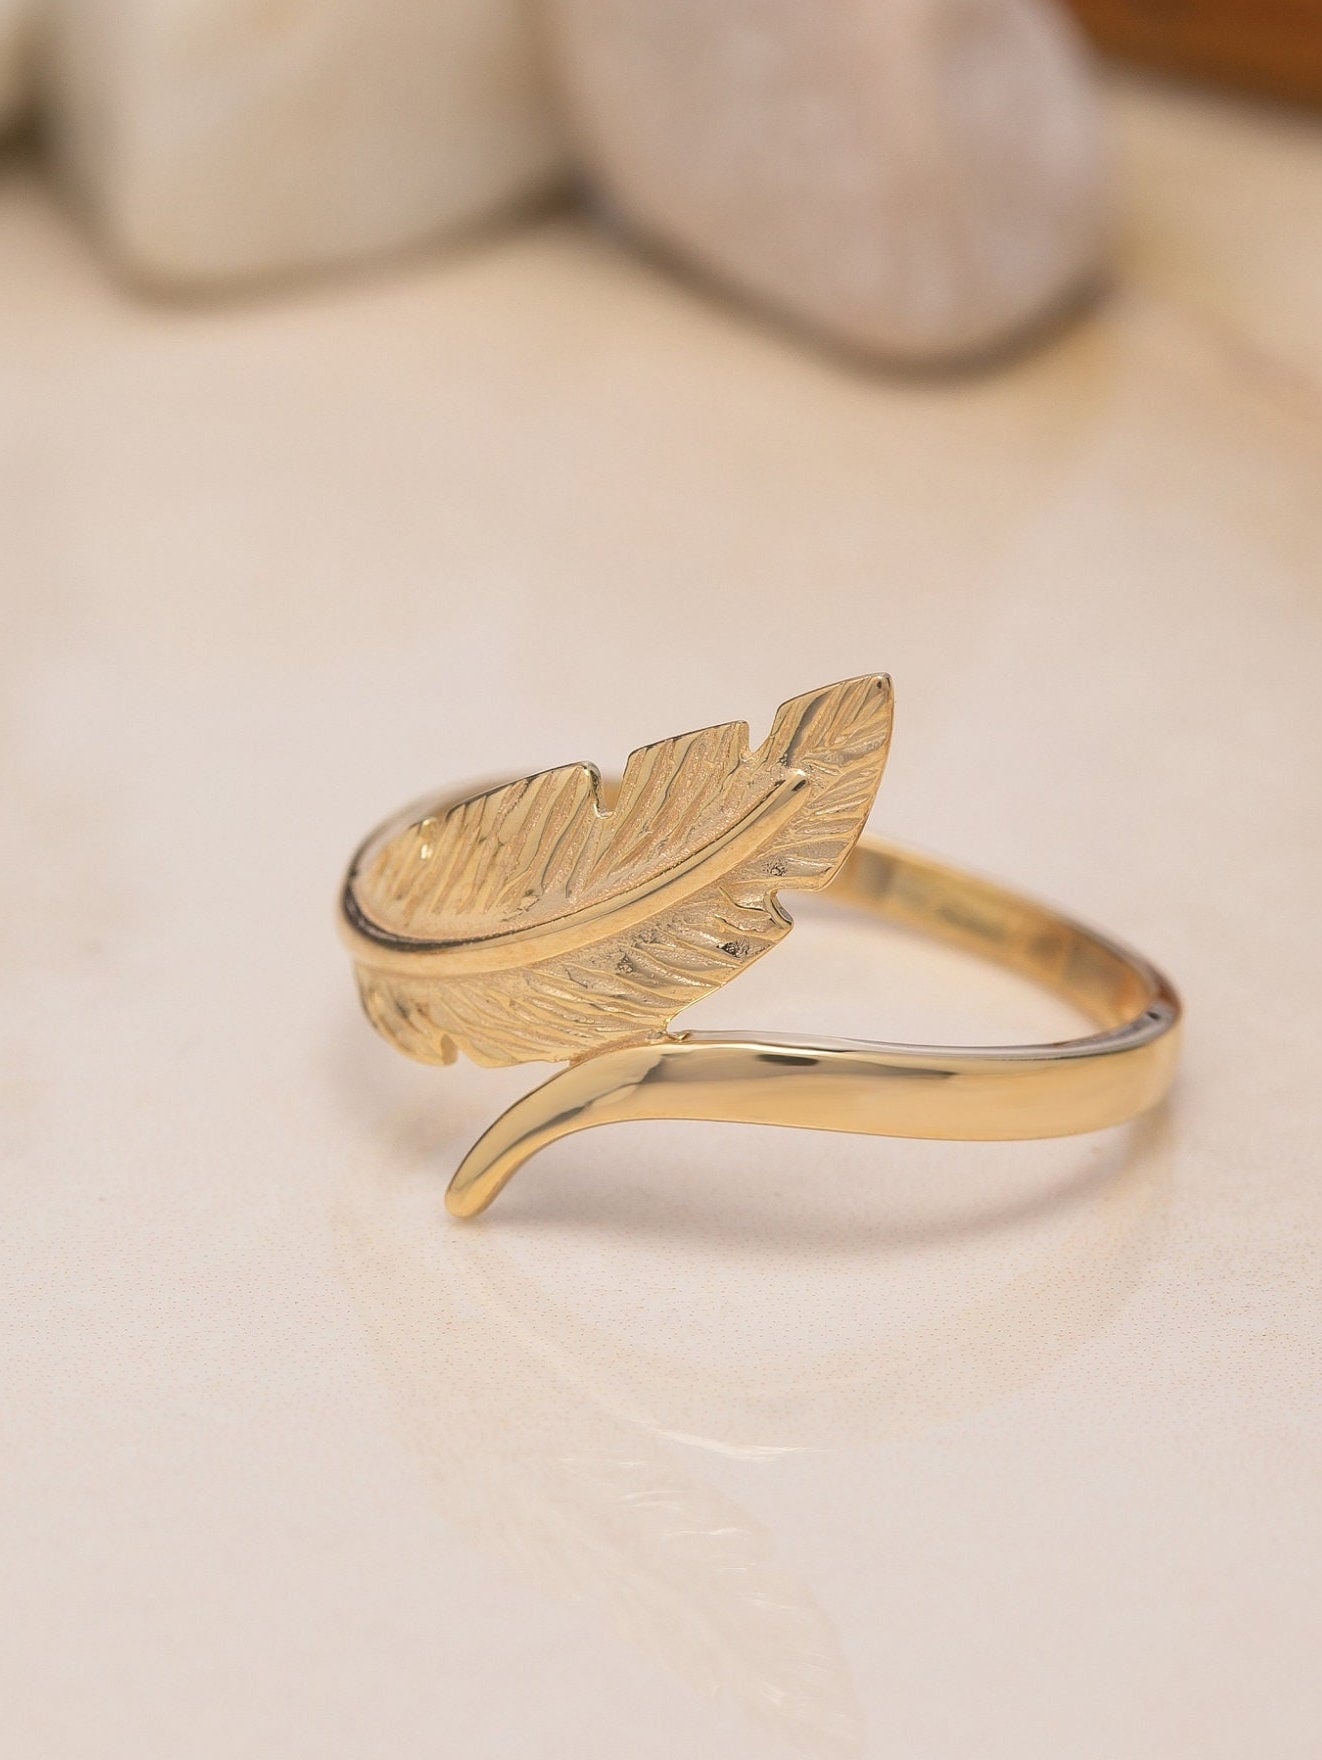 14K Gold Oak Leaf Ring, 925 Sterling Silver Minimalist Nature-Inspired Jewelry, Crystal Open Leaf Ring, Botanical Women's Dainty Leaf Ring